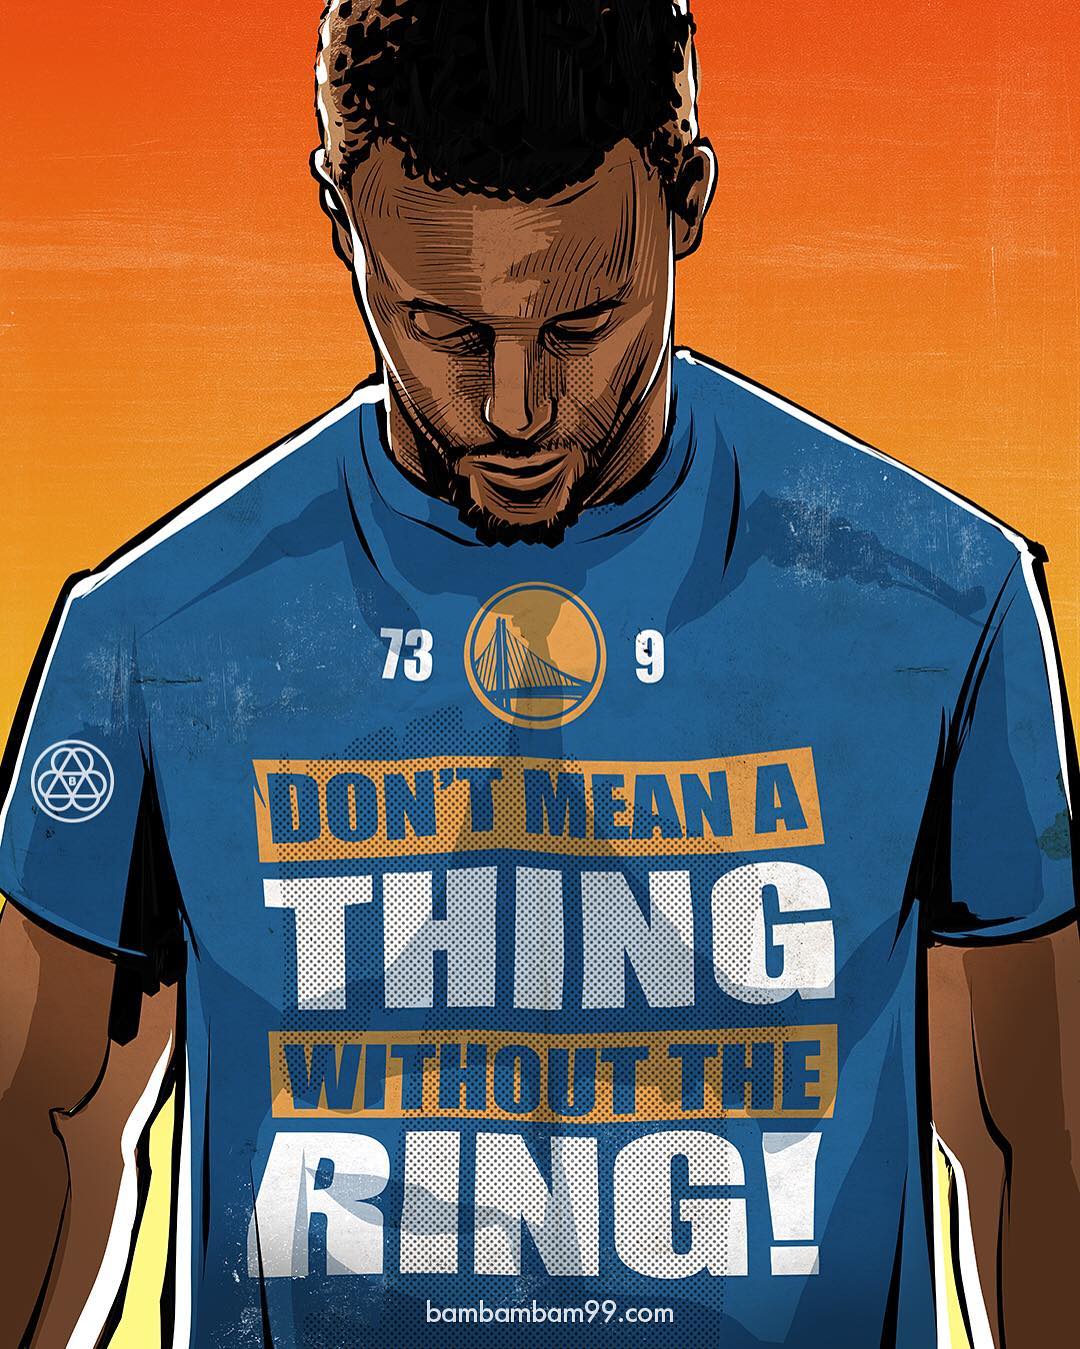 Stephen Curry 'Don't Mean a Thing' Illustration' Illustration